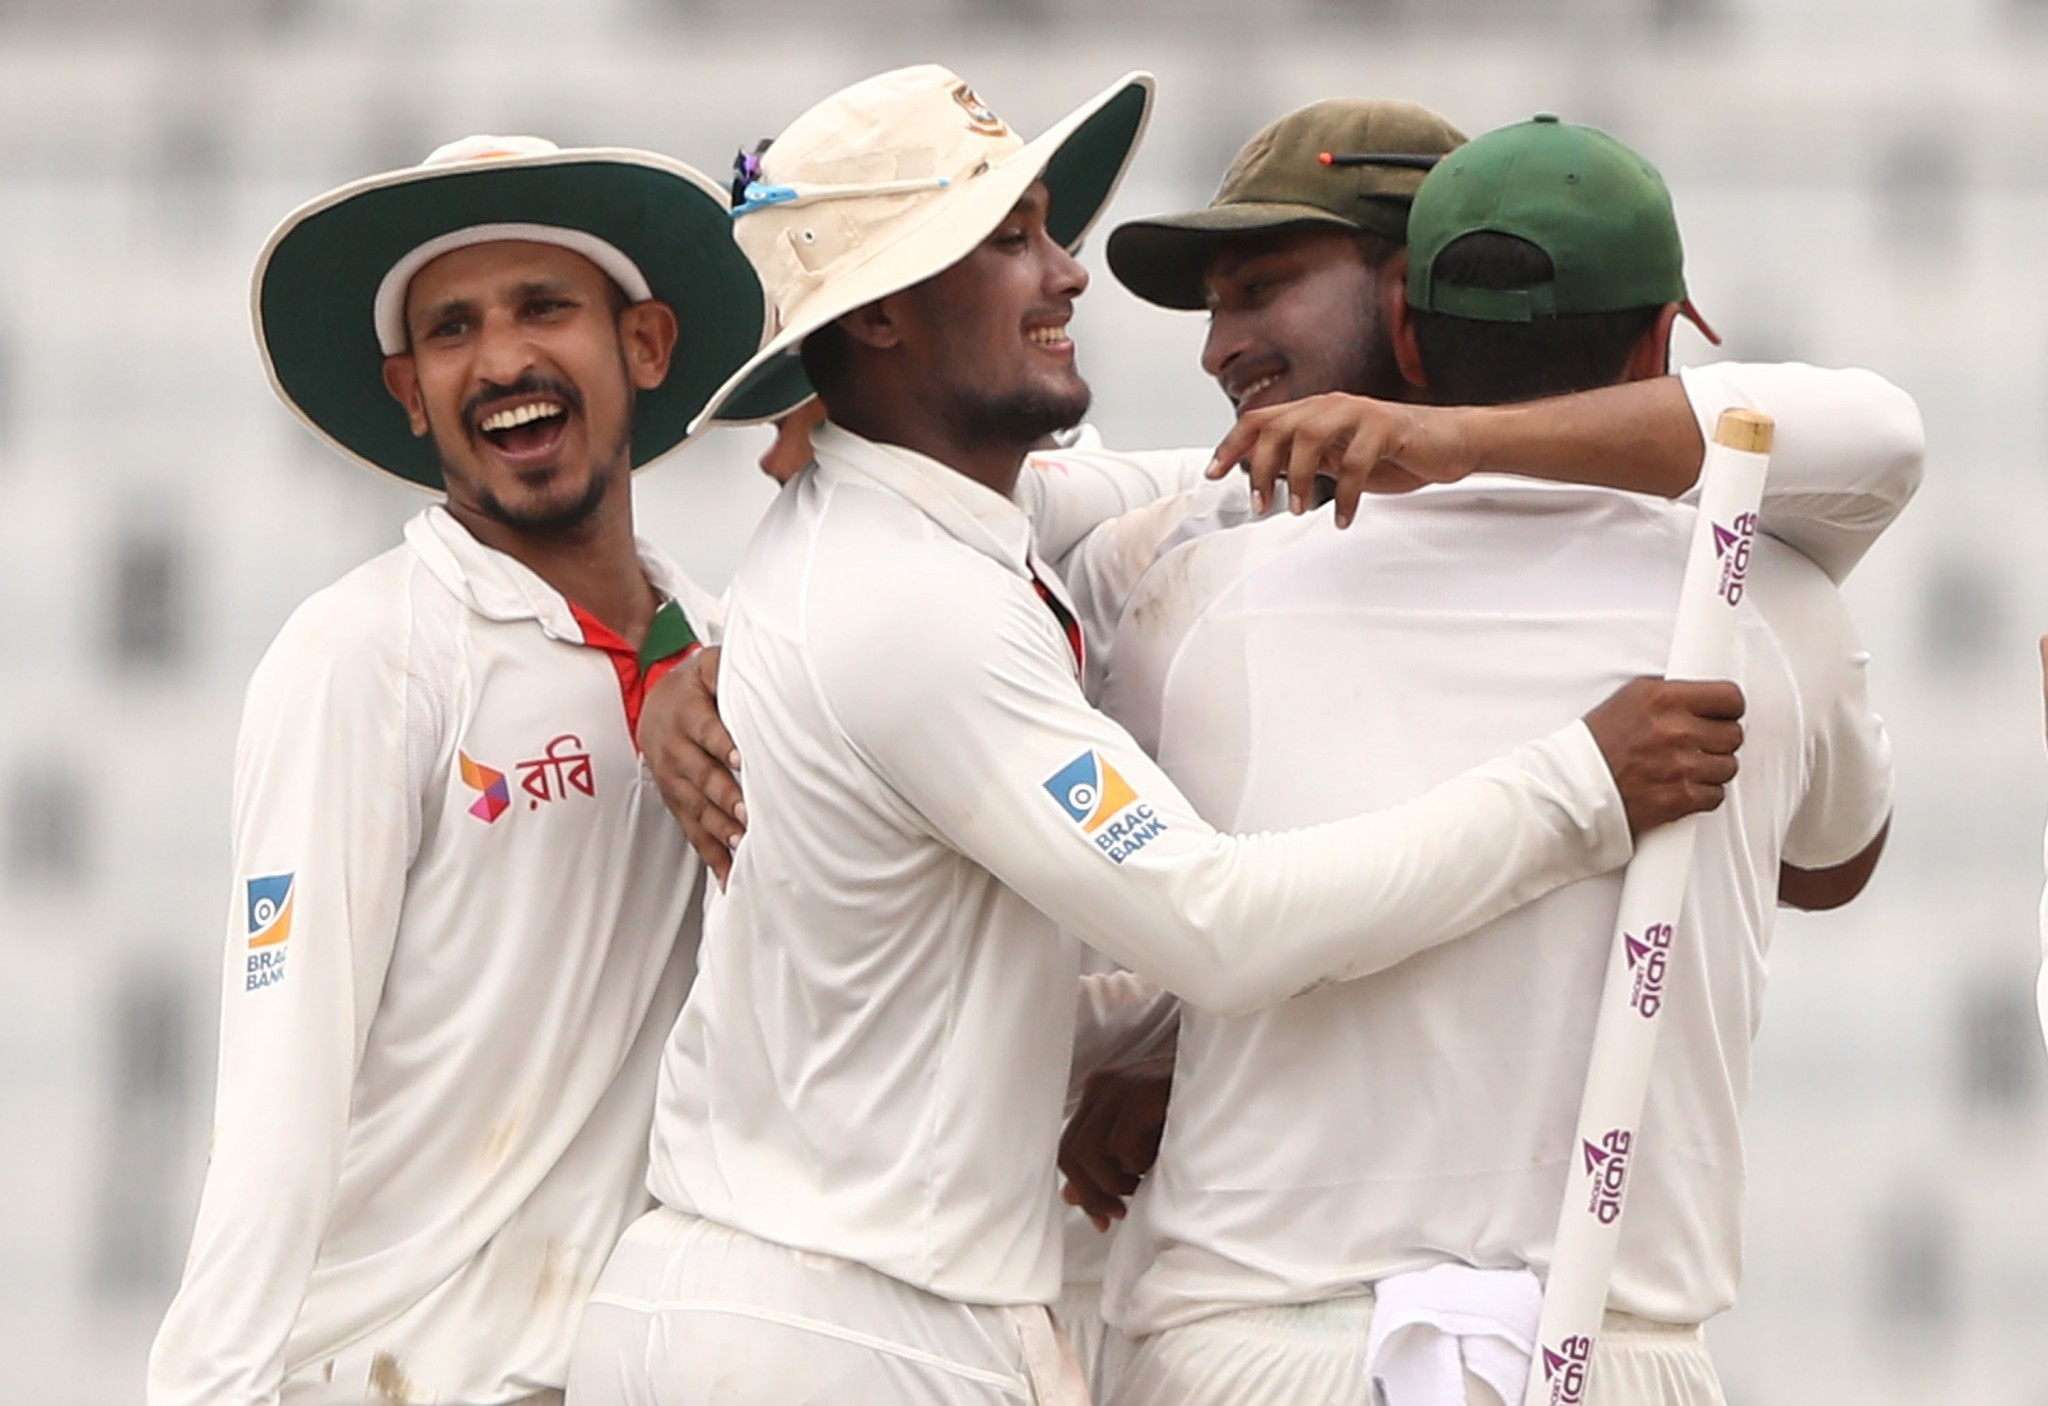 Bangladesh claimed a historic win over Australia in the clash in Dhaka ©Getty Images